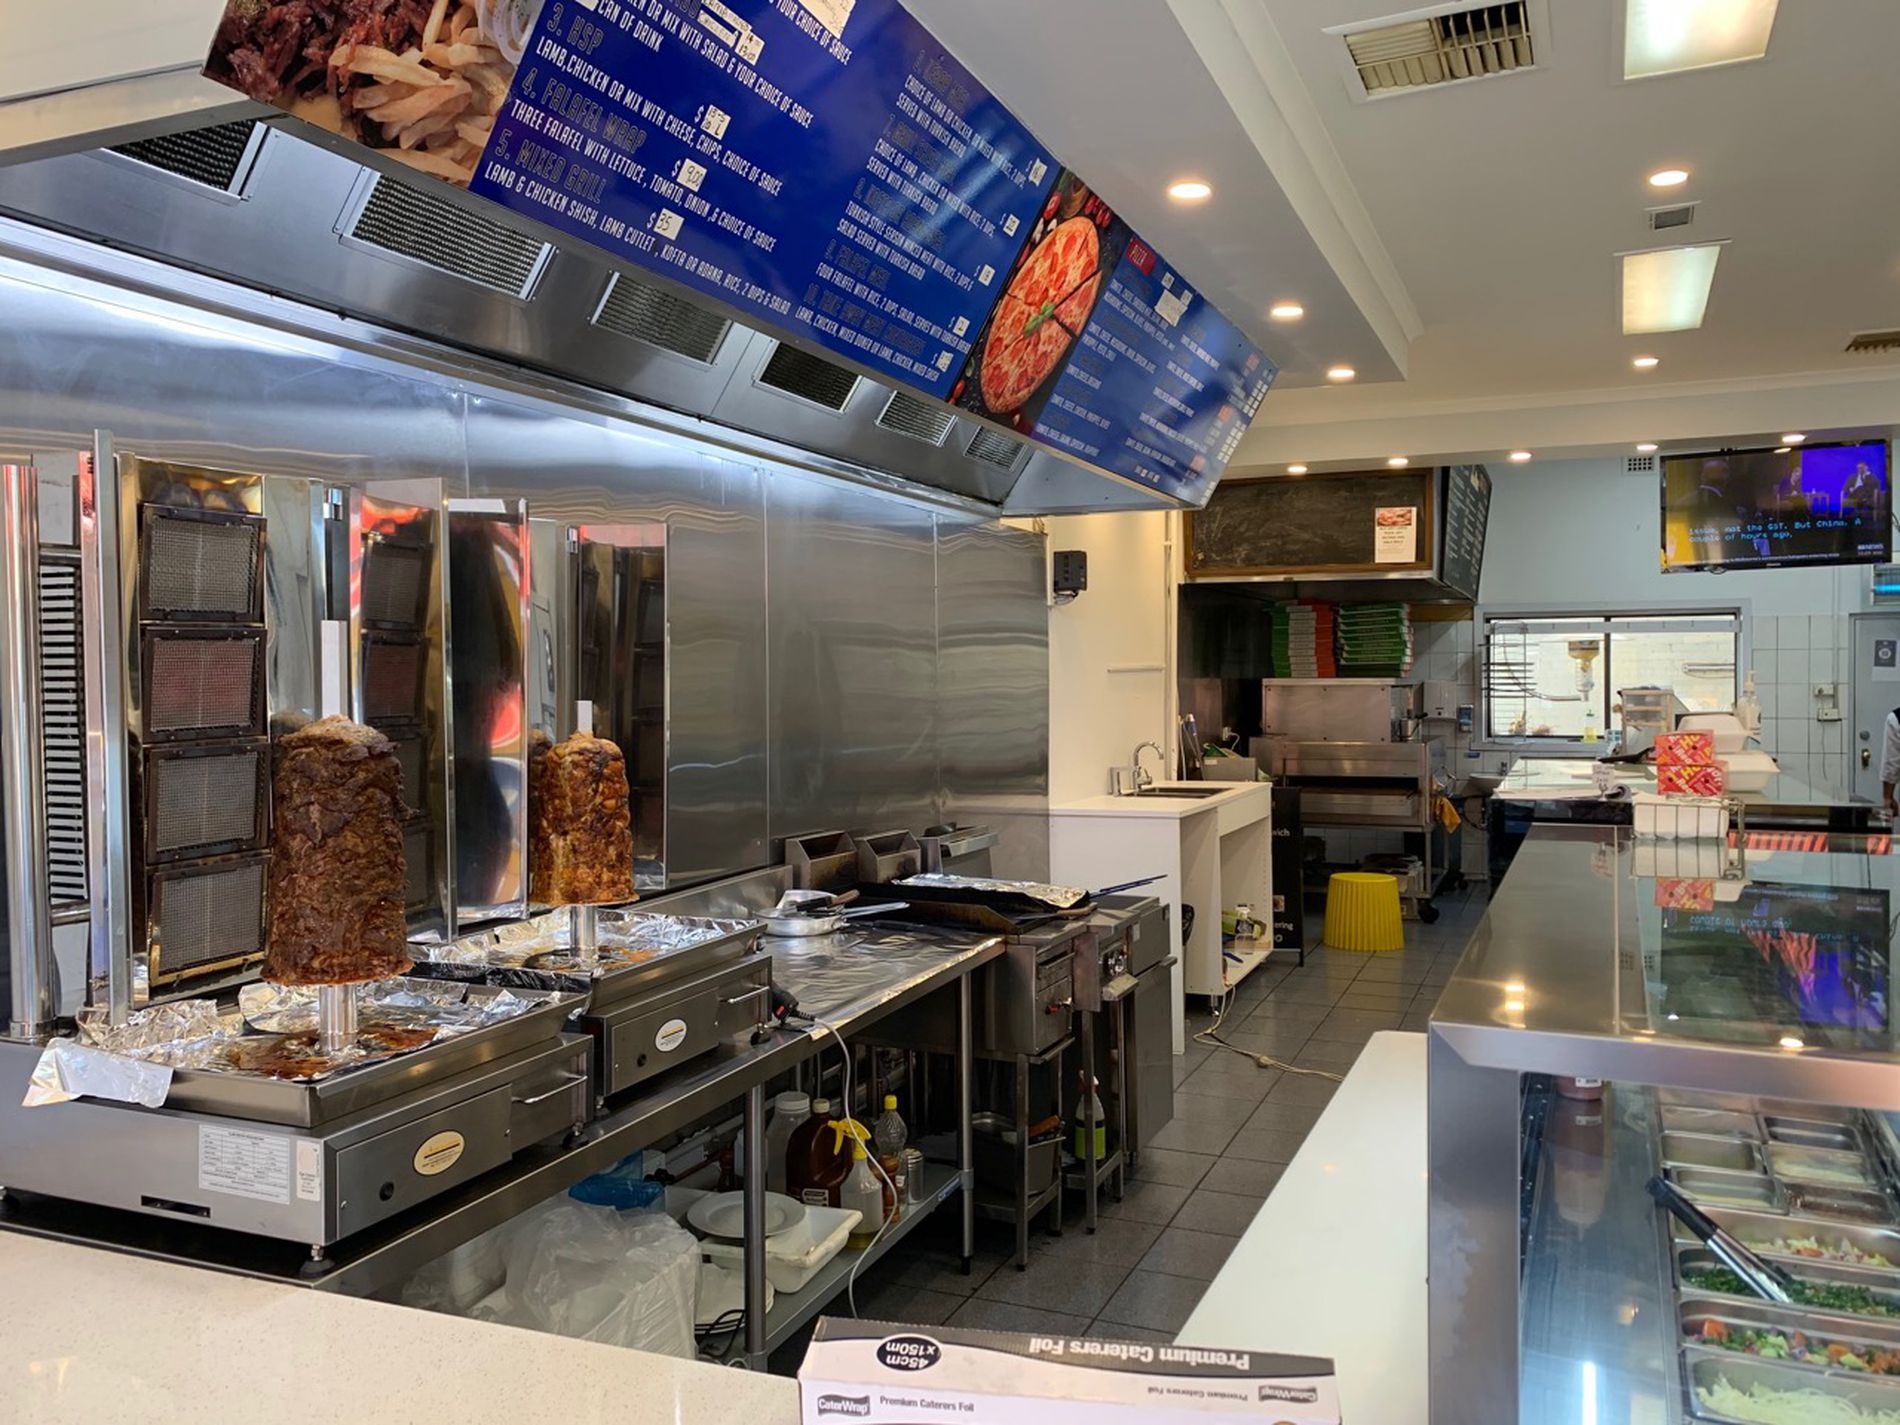 Kebab and Pizza Cafe and Takeaway Business for Sale